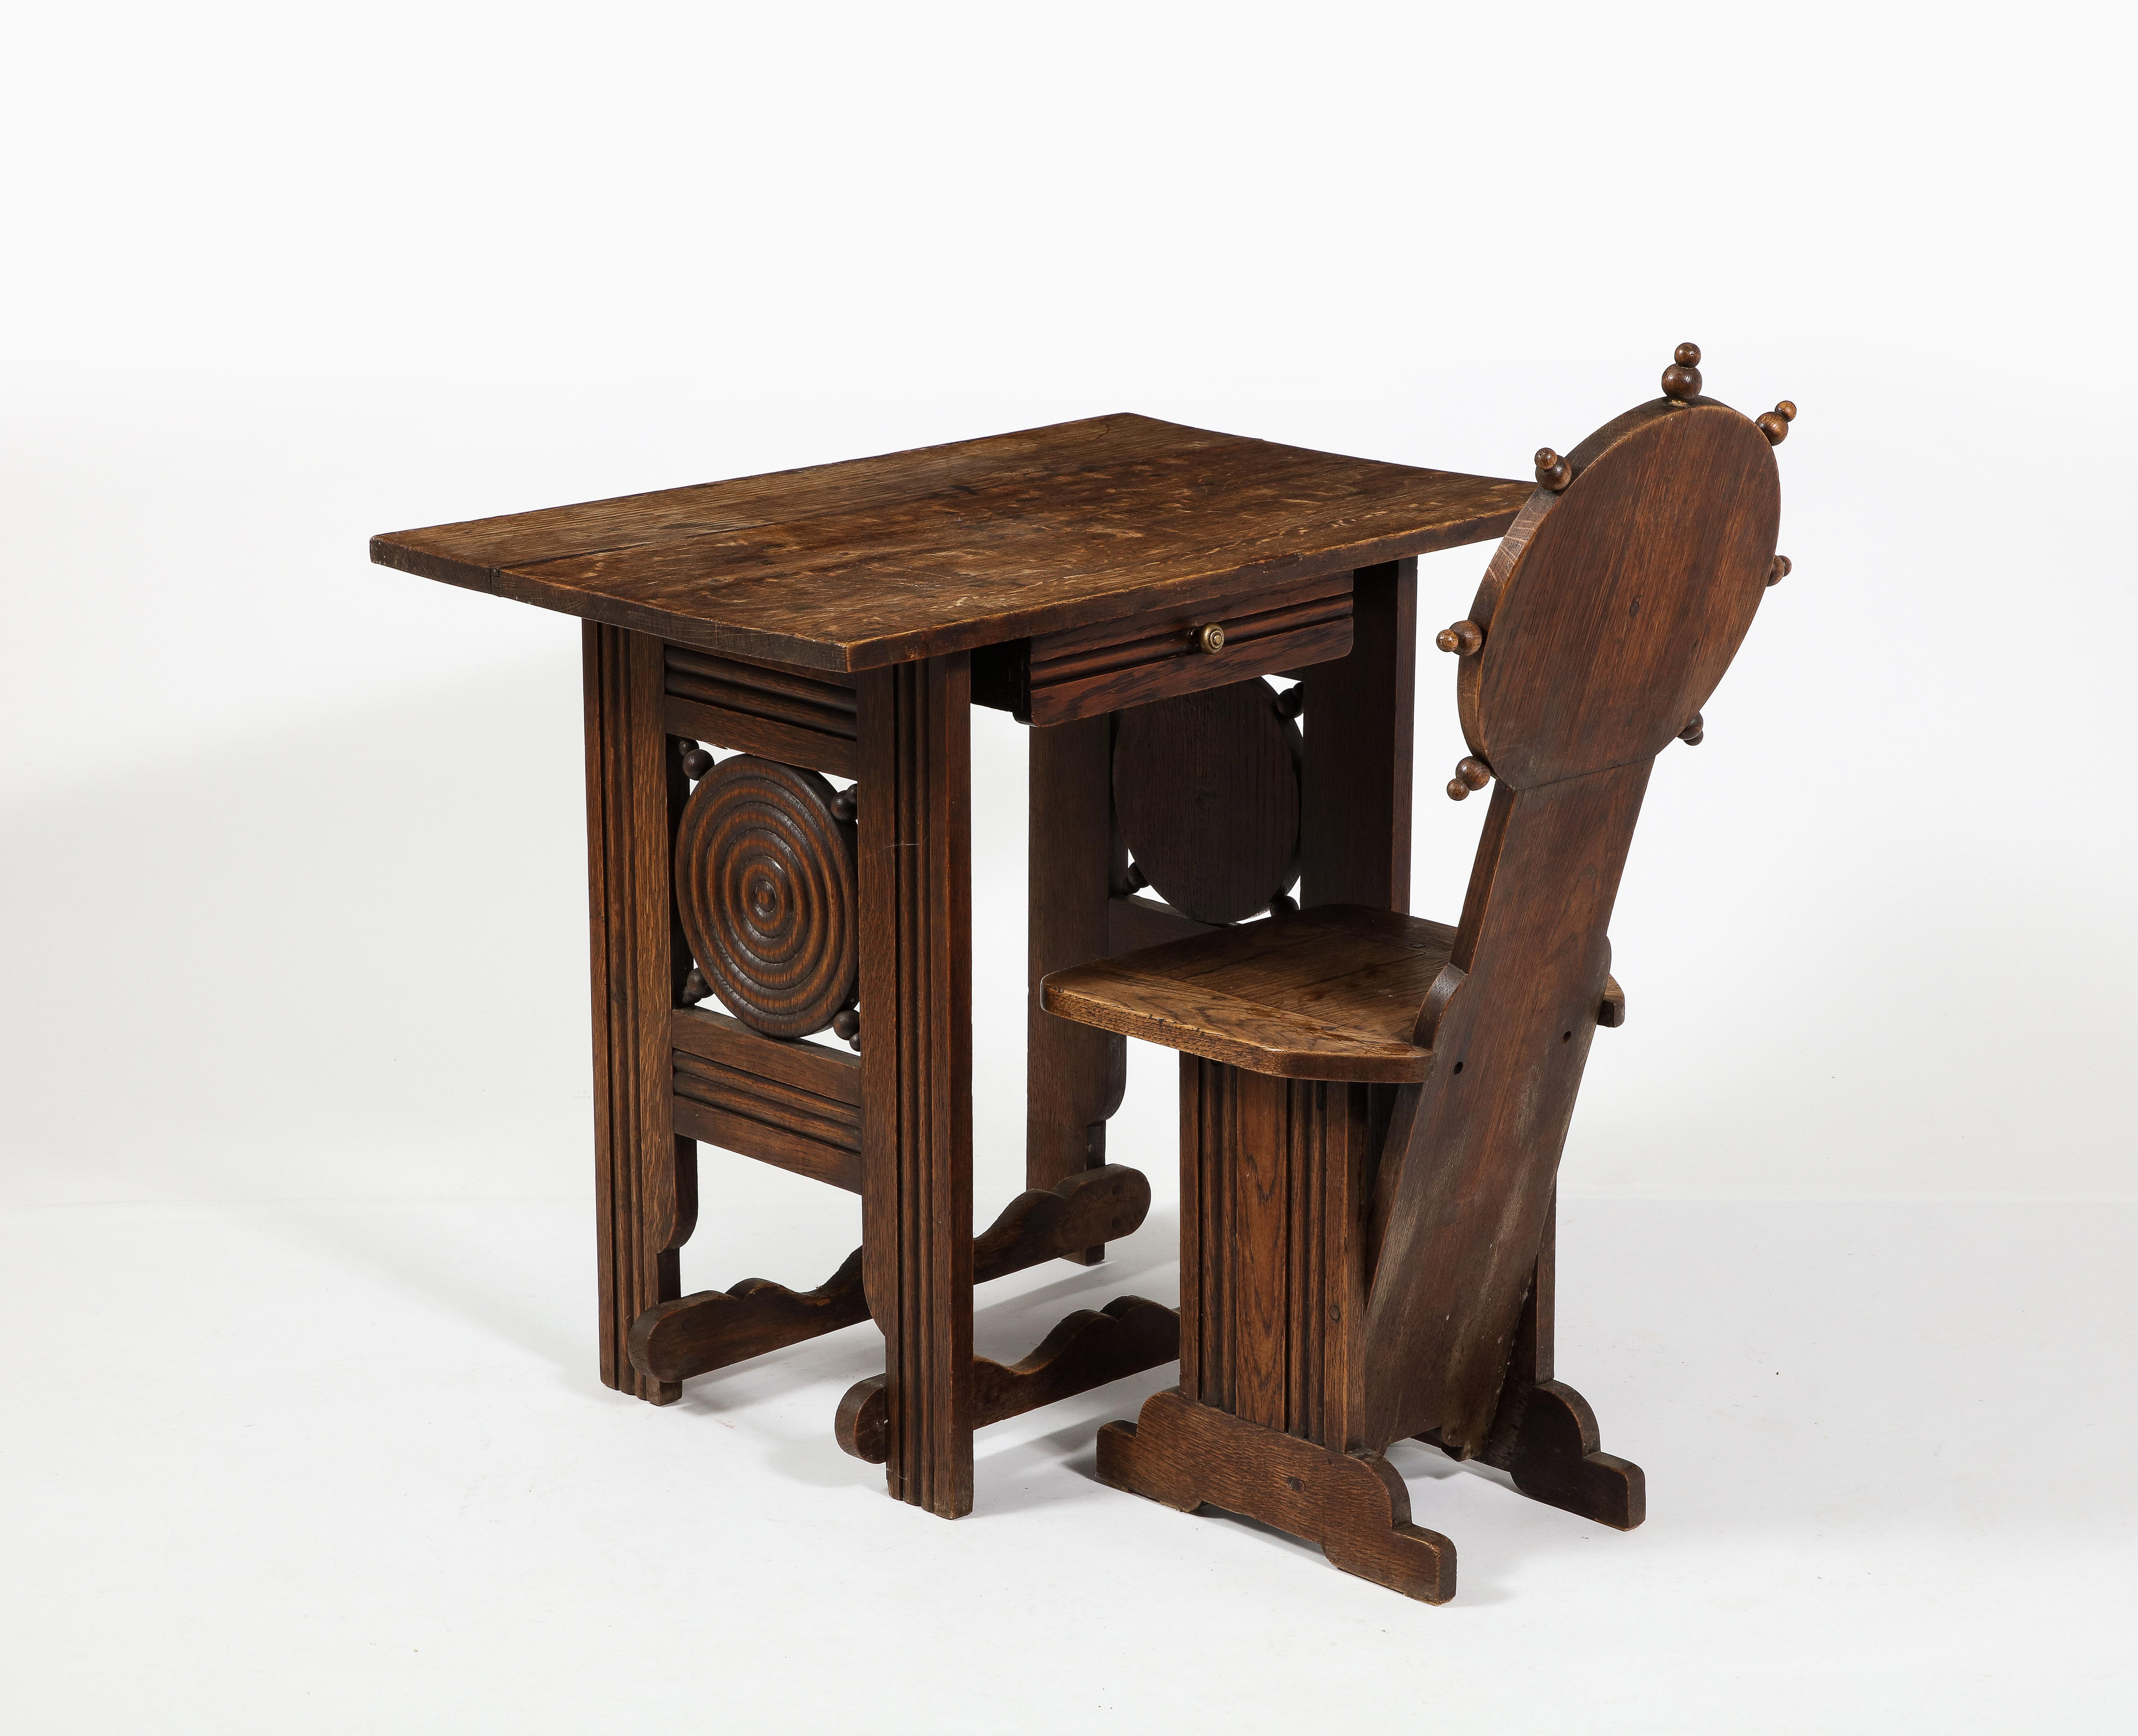 Writing desk en suite with its matching chair, hand carved Walnut with many details.



Desk 28x21.5x31.5
Chair 33x16x15